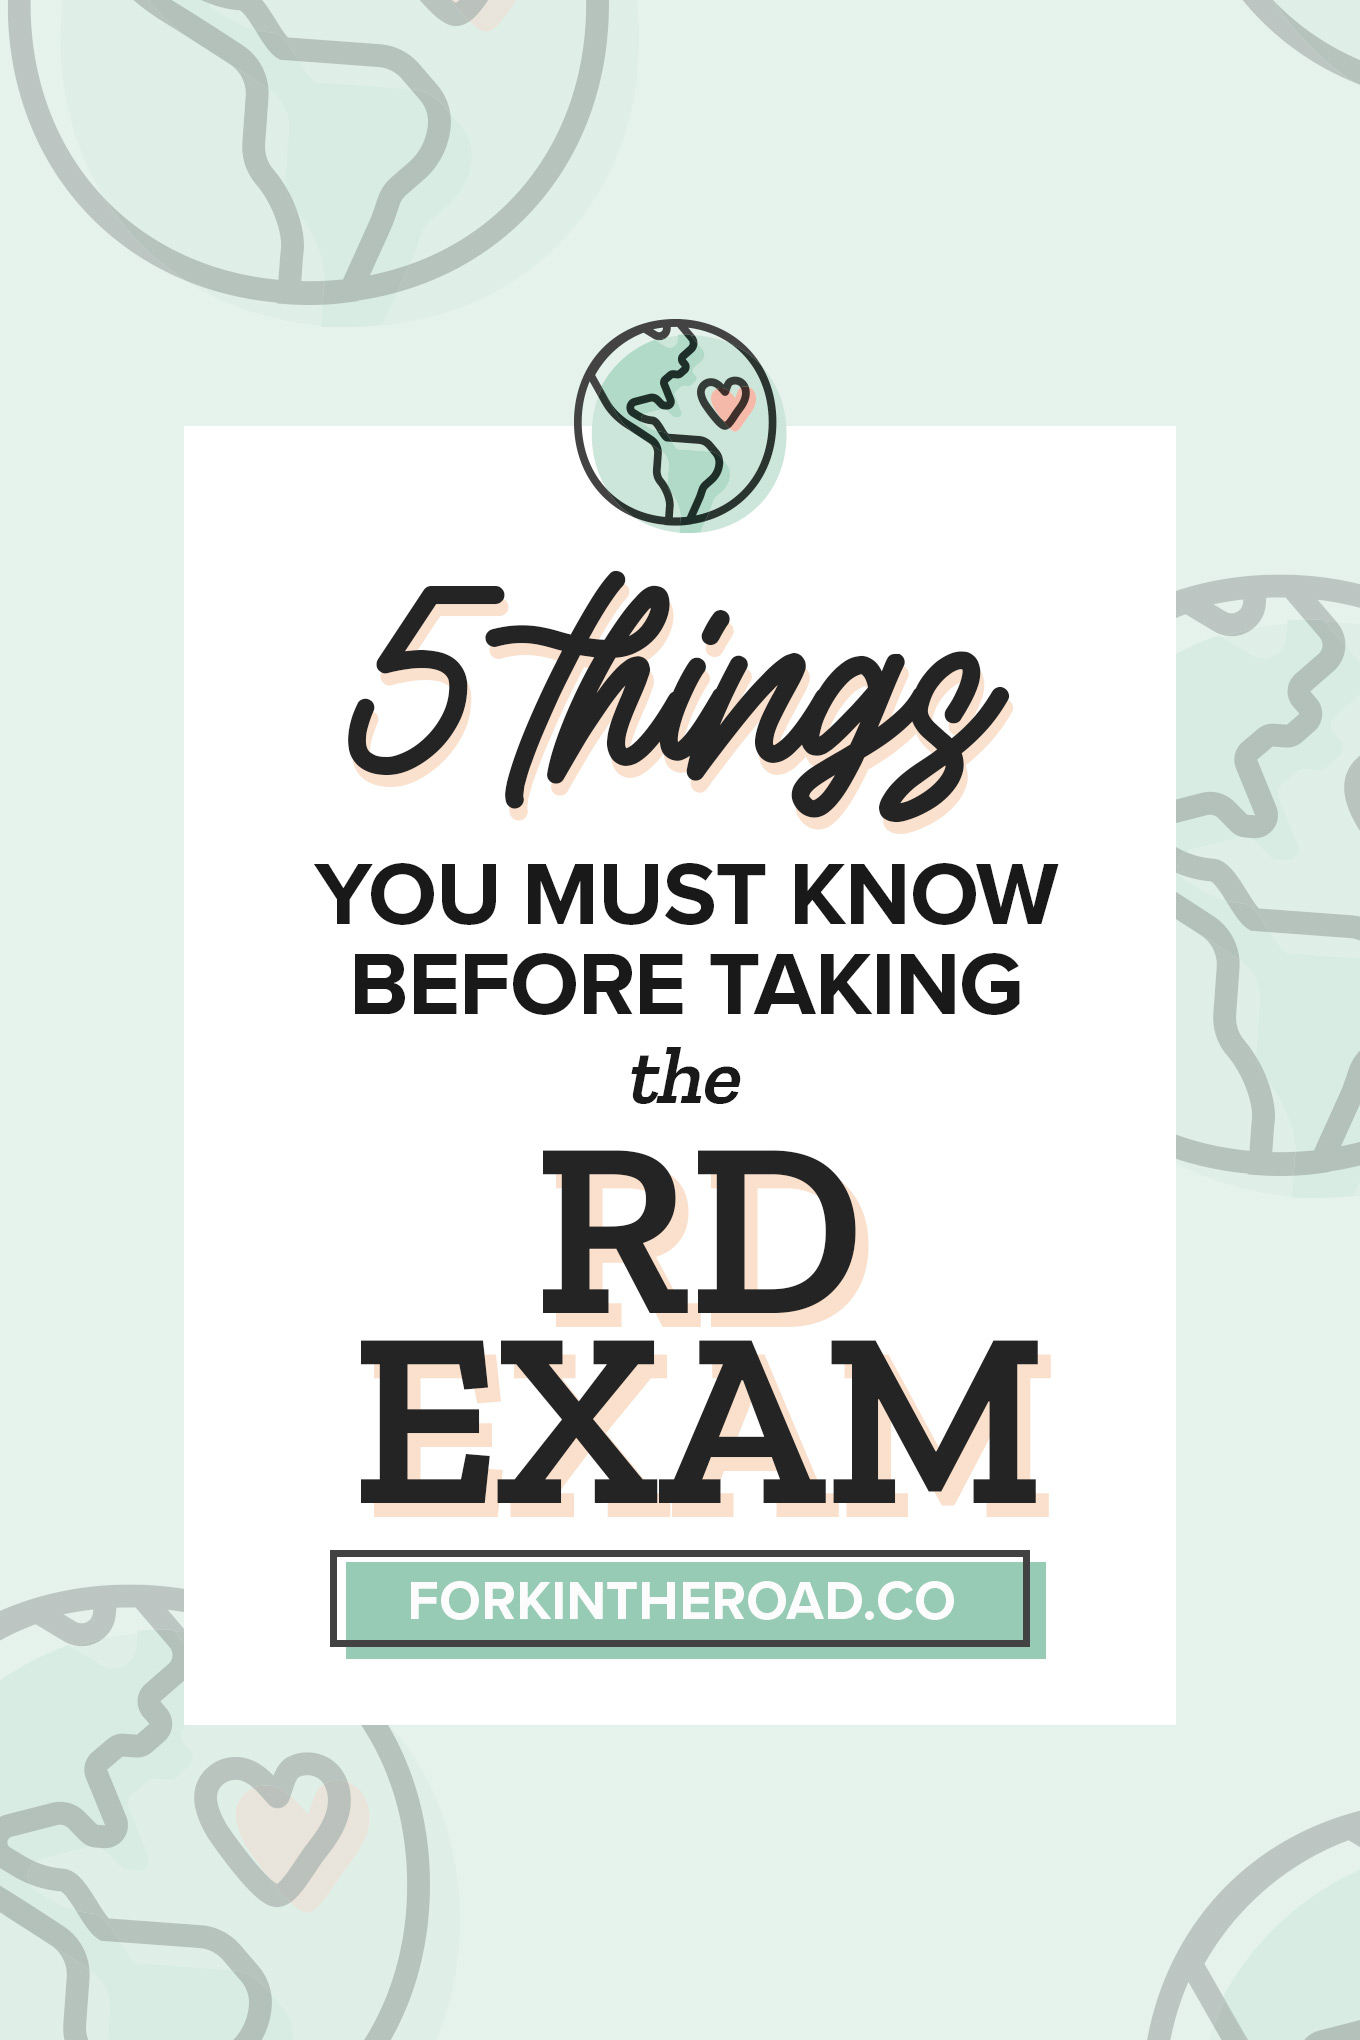 5 Things to Know Before Taking the RD Exam